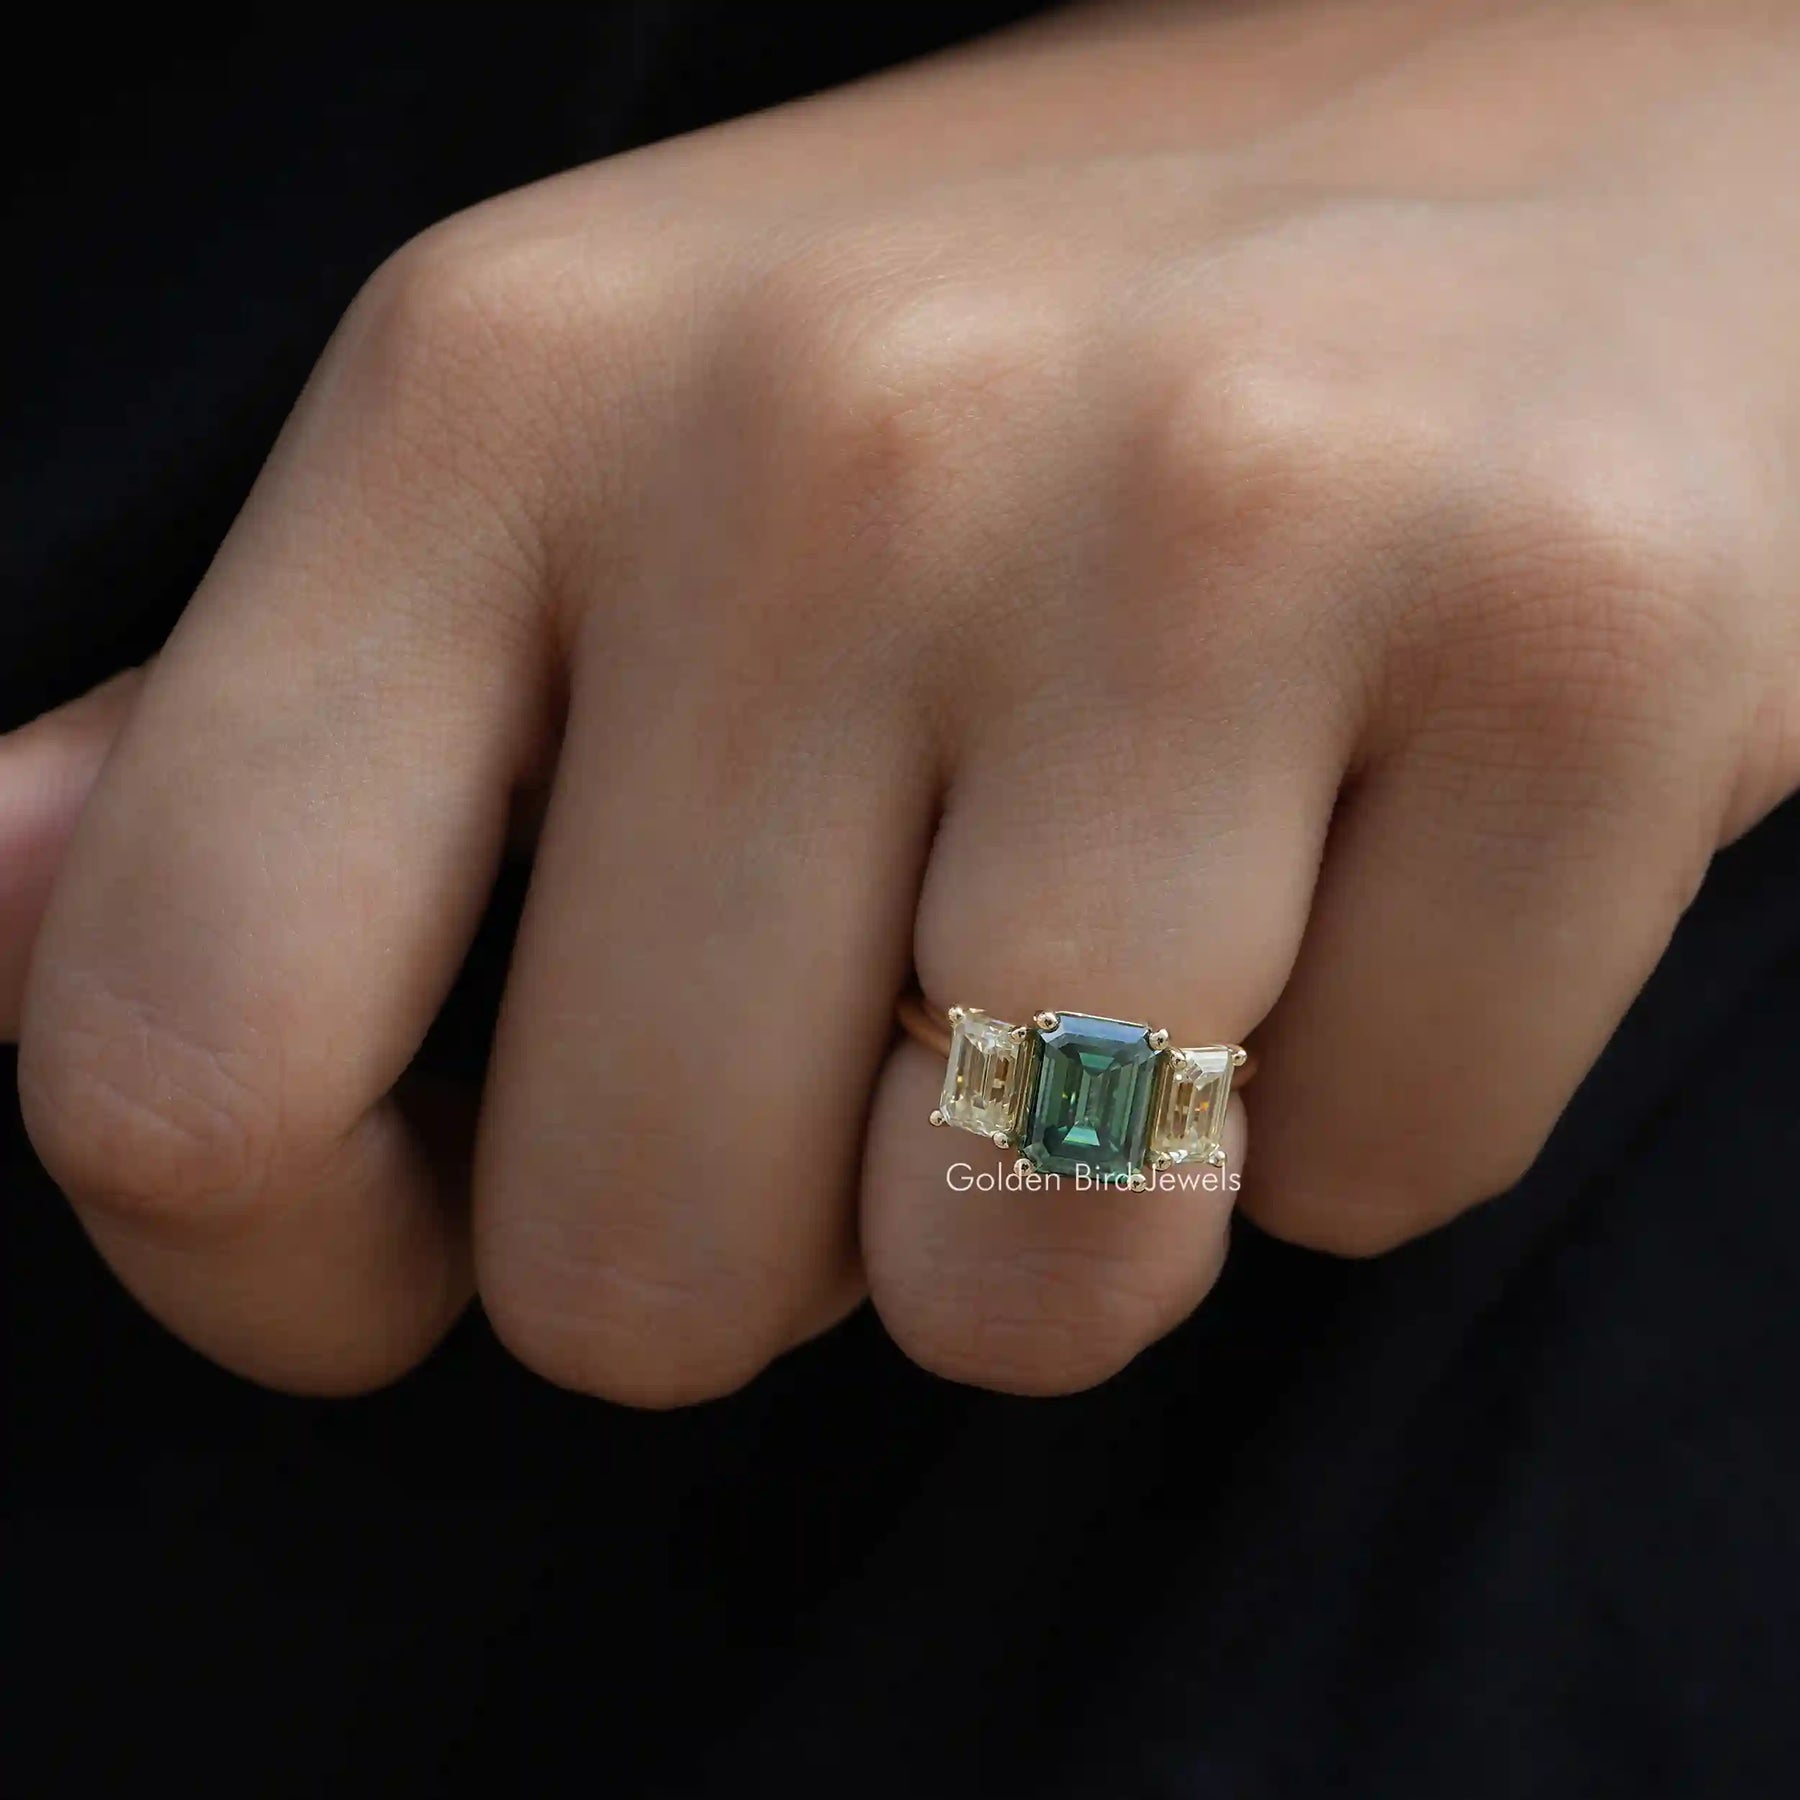 [In finger front view of 3 stone emerald cut moissanite ring crafted with 14k yellow gold]-[Golden Bird Jewels]